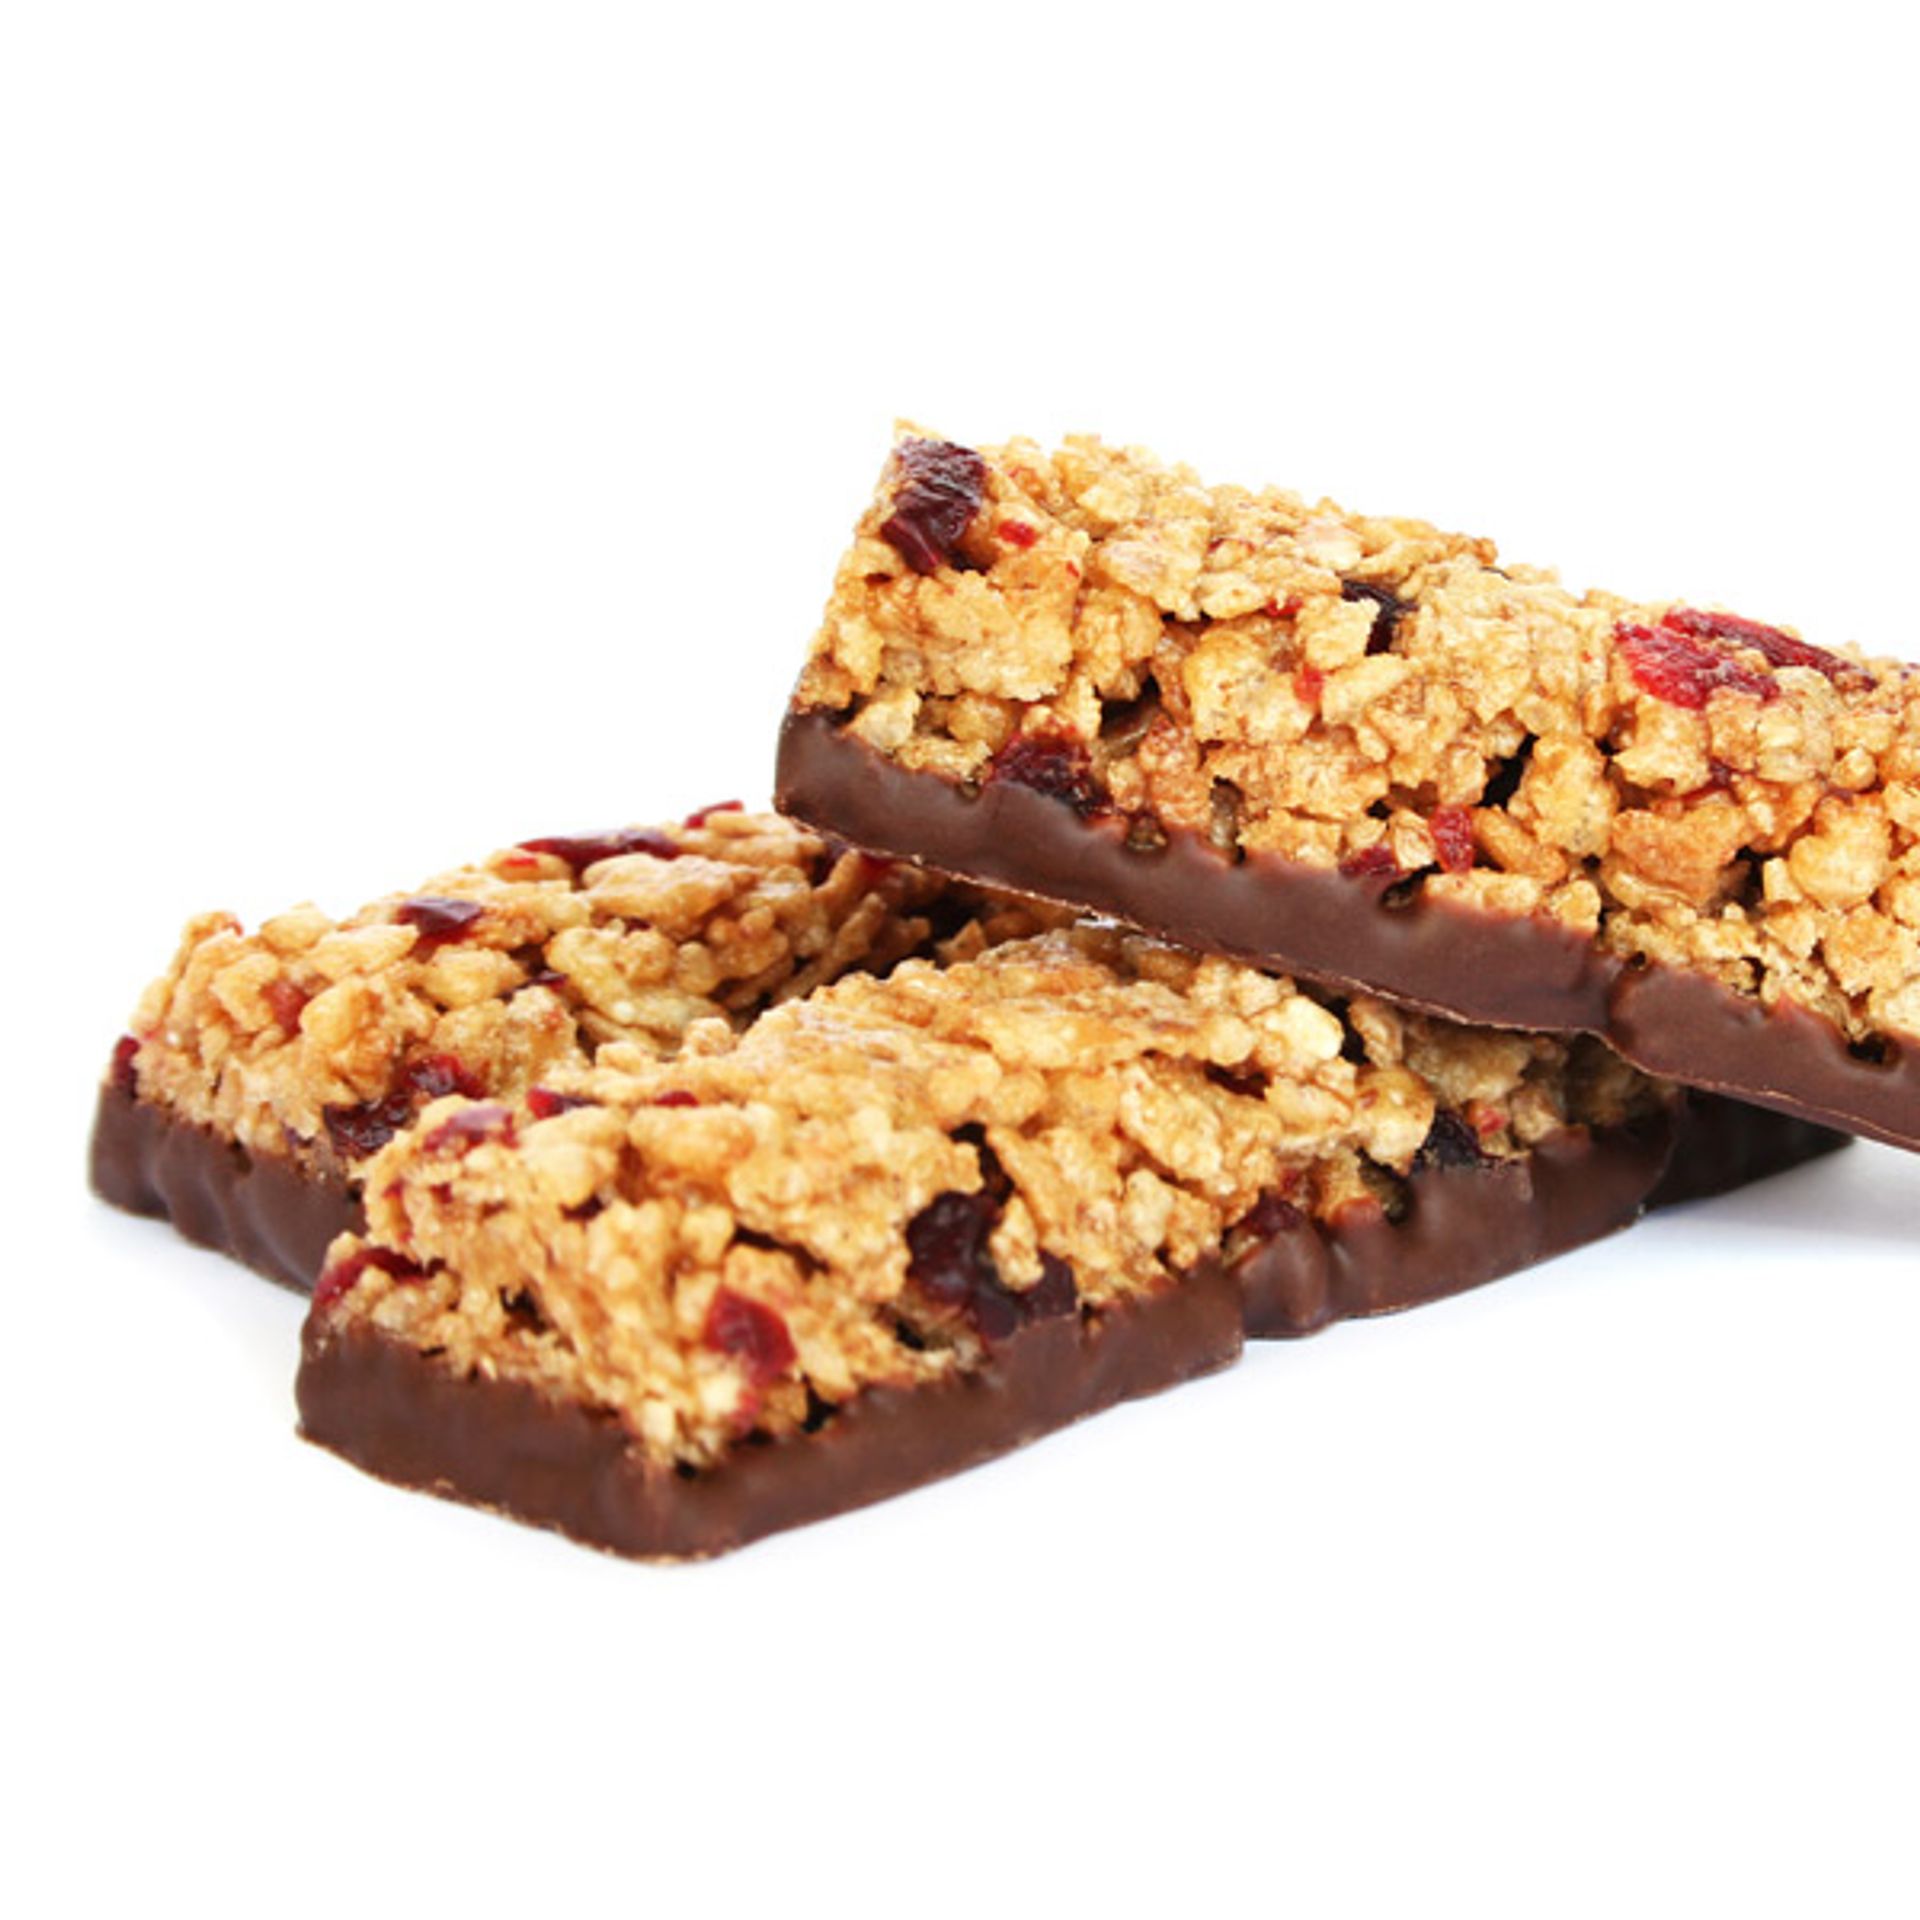 Example of a cereal bar